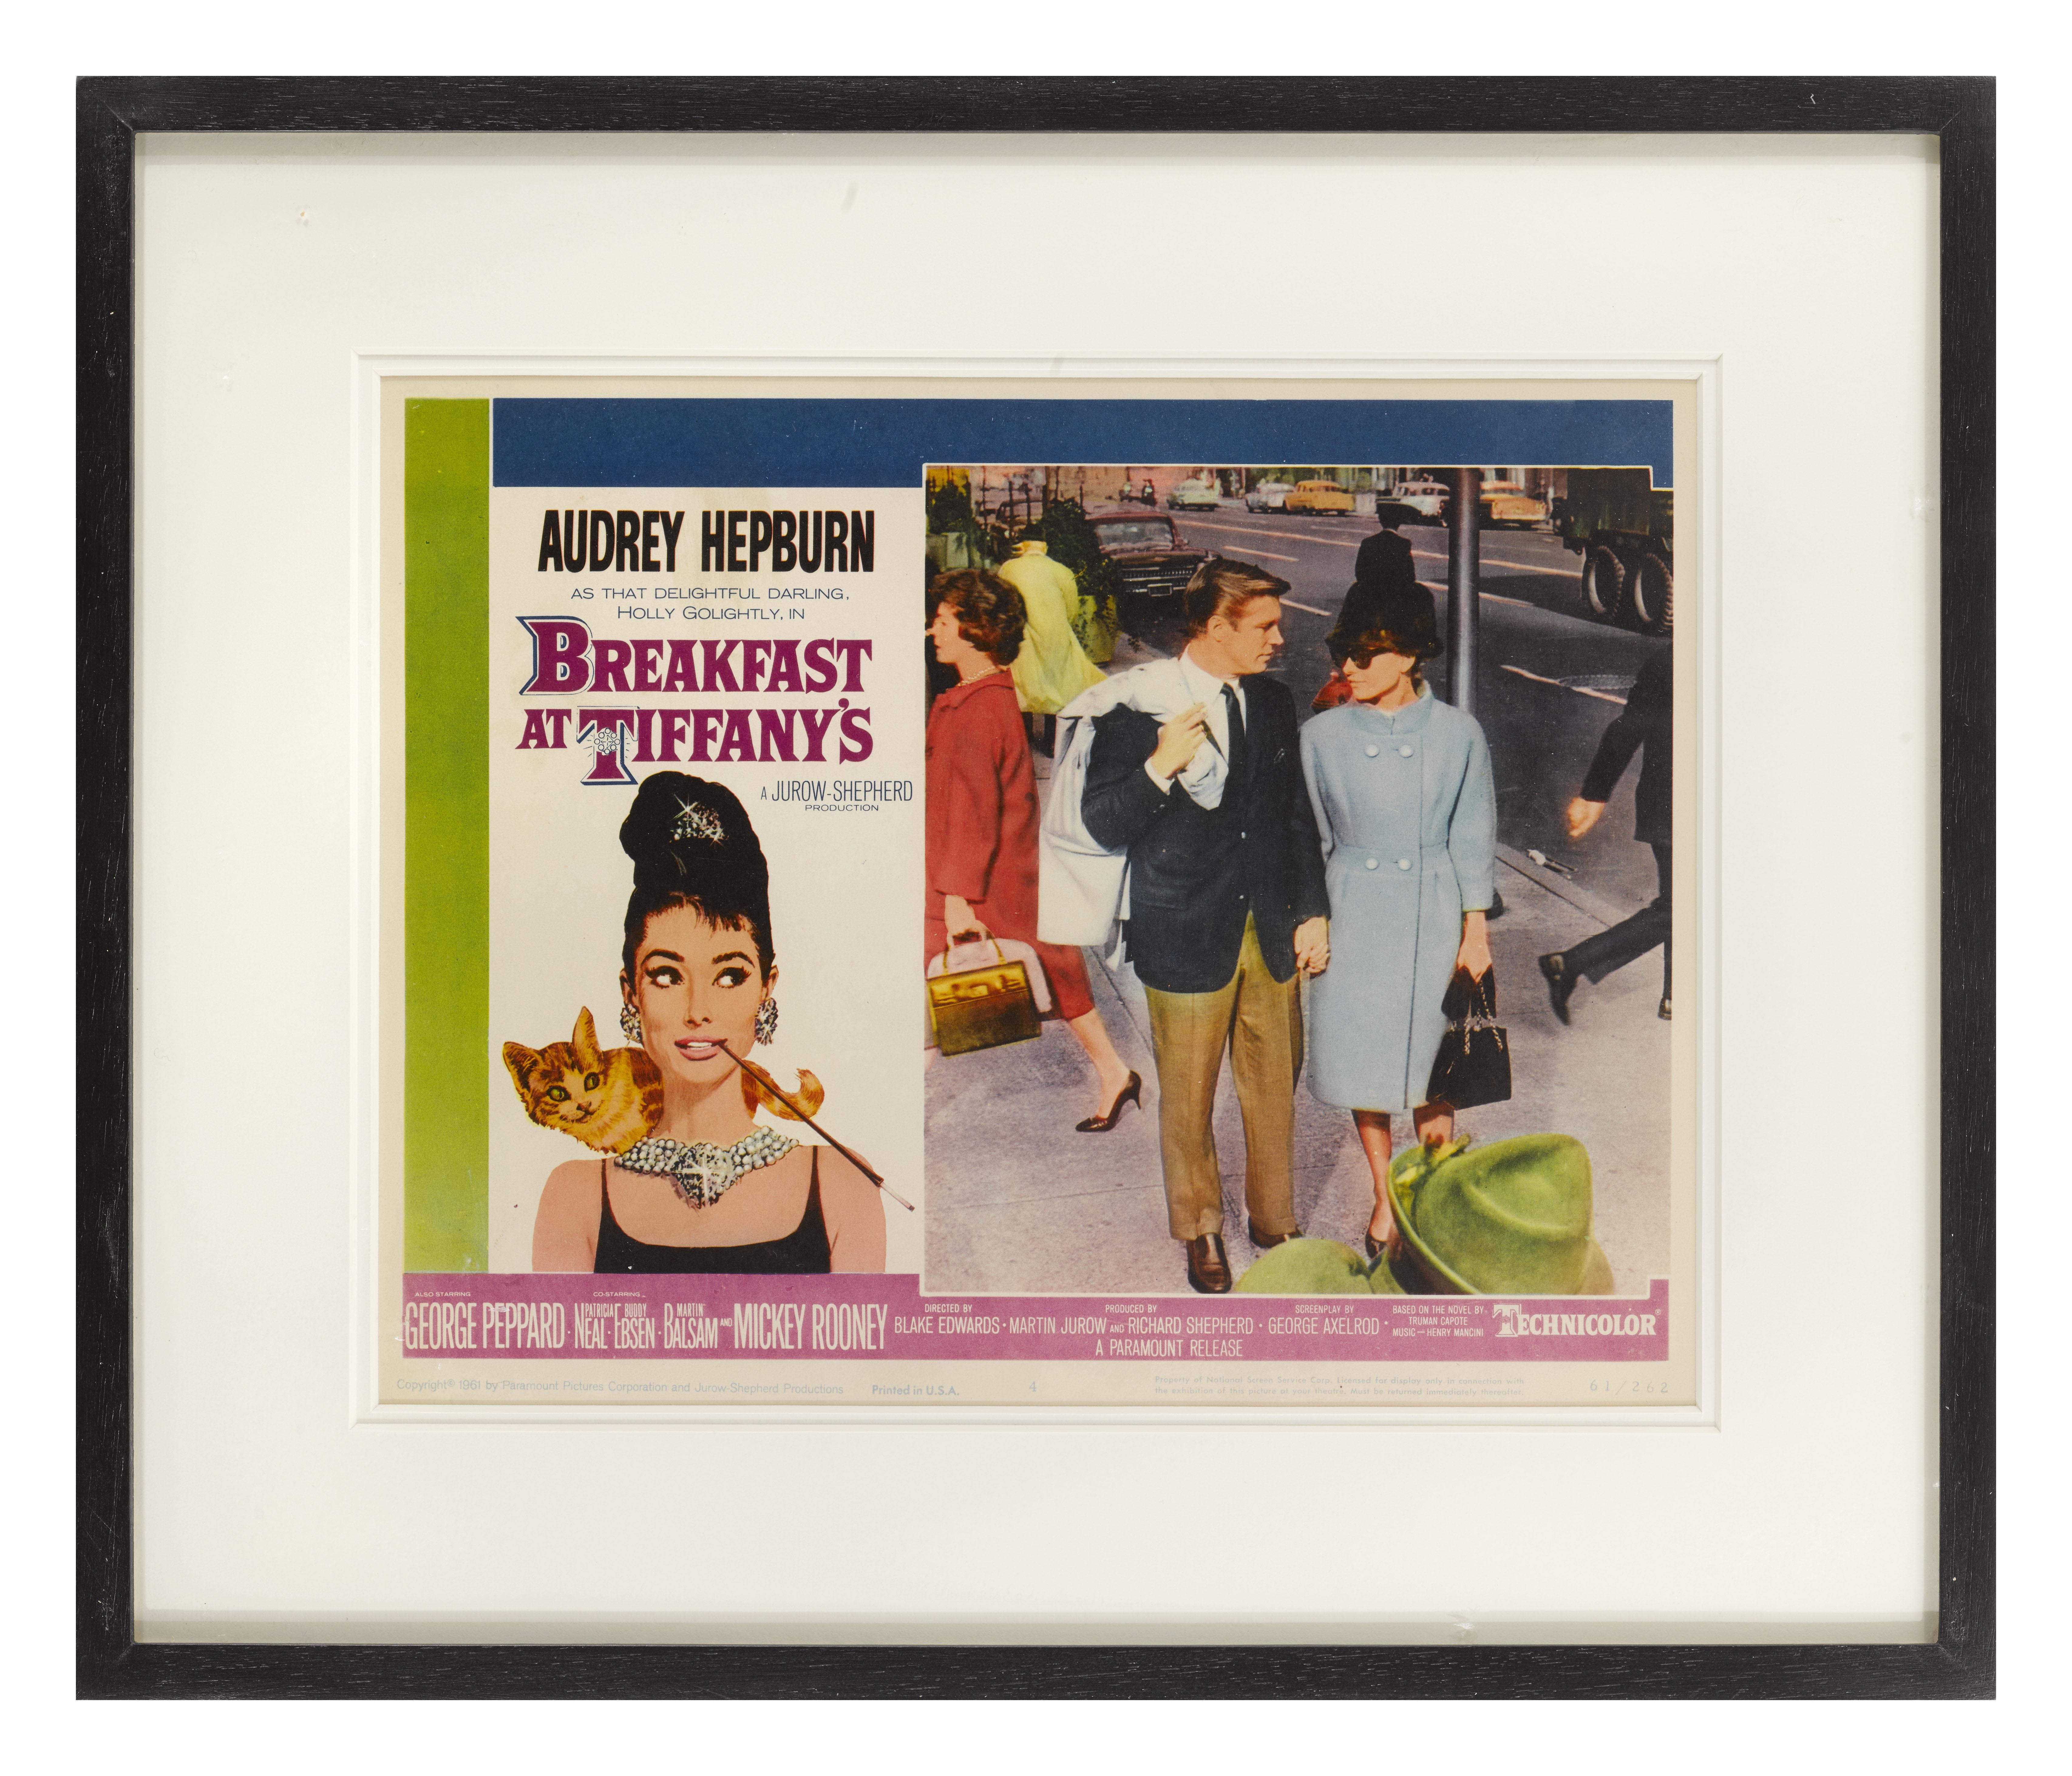 Original US Lobby card number 4 designed for the legendary 1961 Audrey Hepburn Comedy, Romance.
This film was directed by Blake Edwards, and stars Audrey Hepburn and George Peppard. This is undoubtedly Hepburn's most famous and iconic role.
This